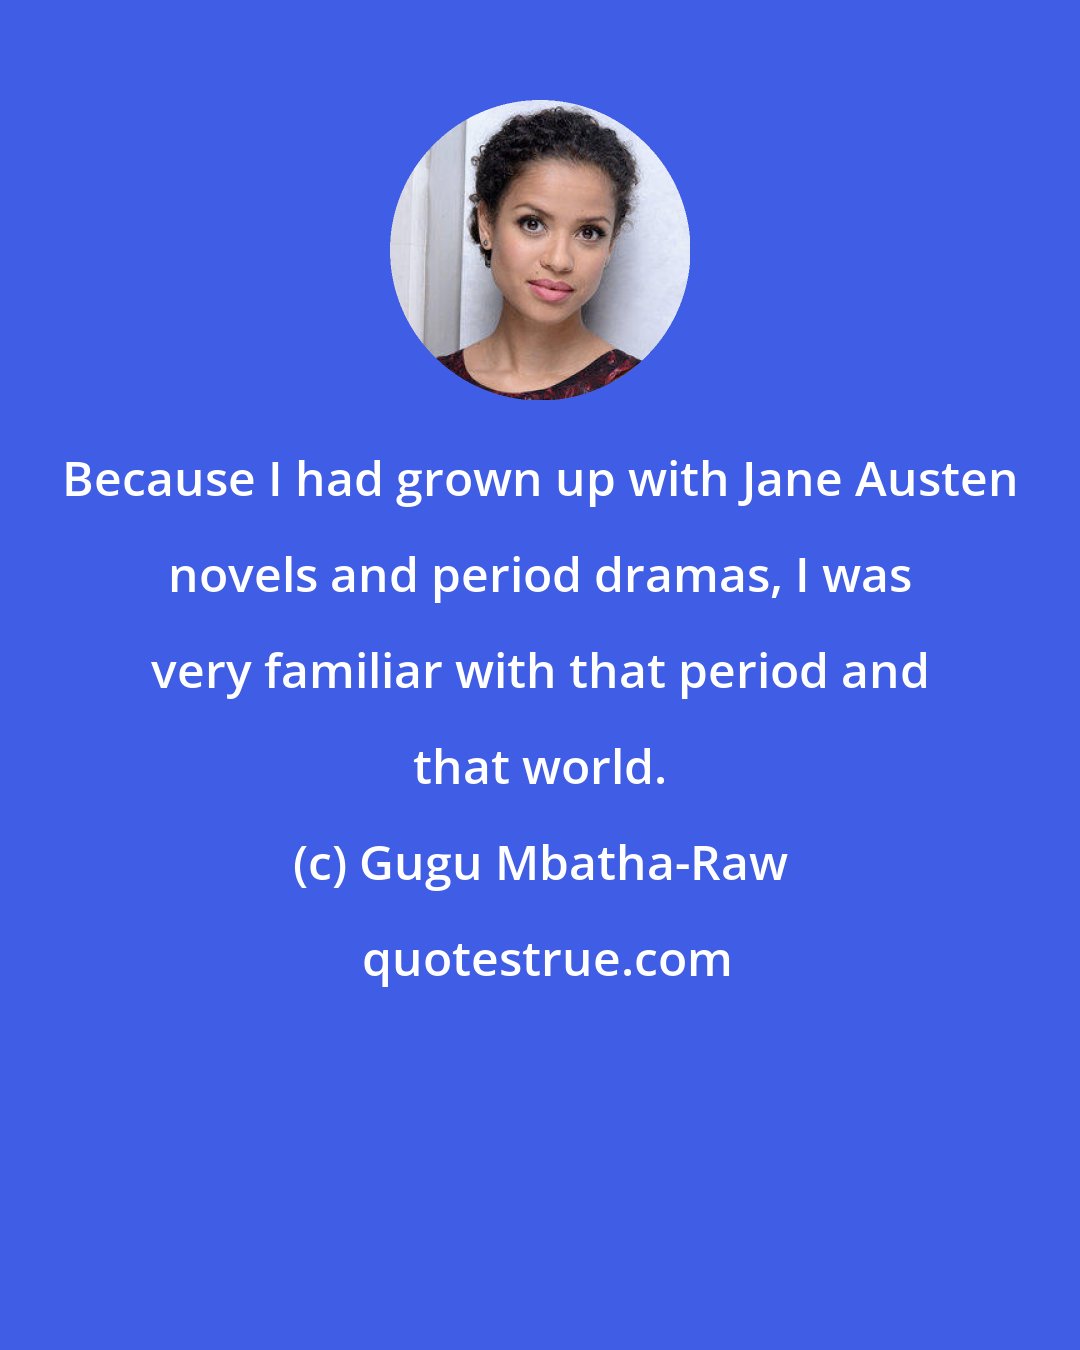 Gugu Mbatha-Raw: Because I had grown up with Jane Austen novels and period dramas, I was very familiar with that period and that world.